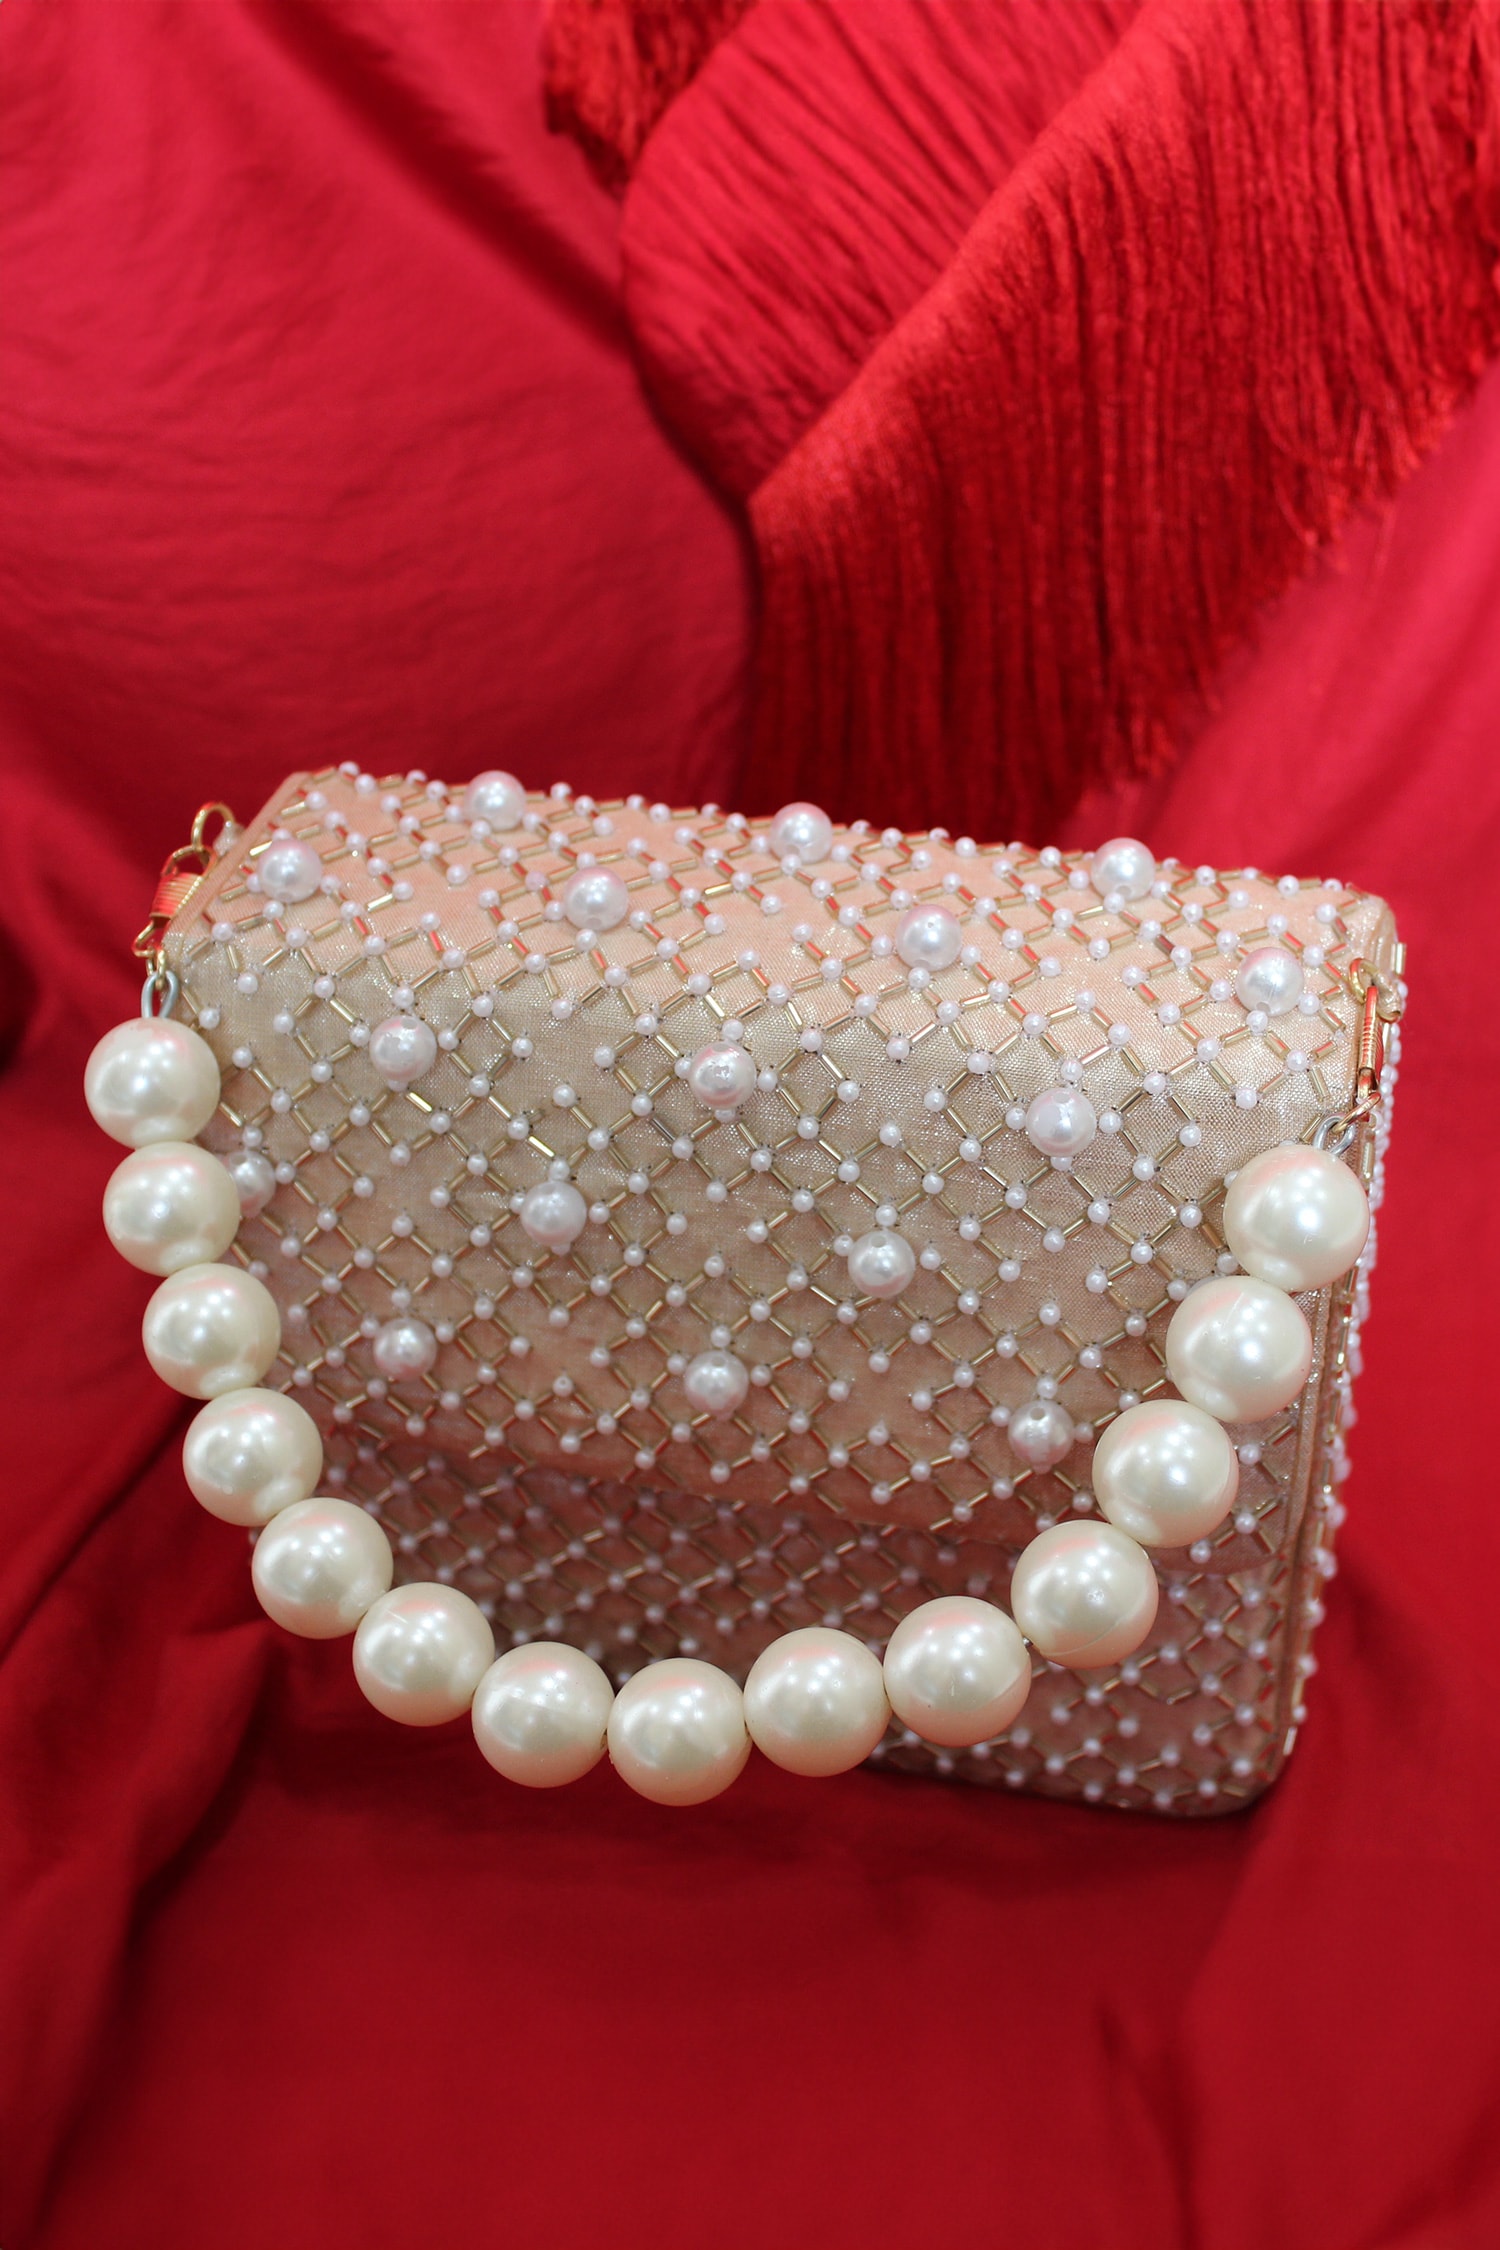 Pearl Beaded Clutch Purse Bag by Debbie Vintage – The Jewelry Lady's Store